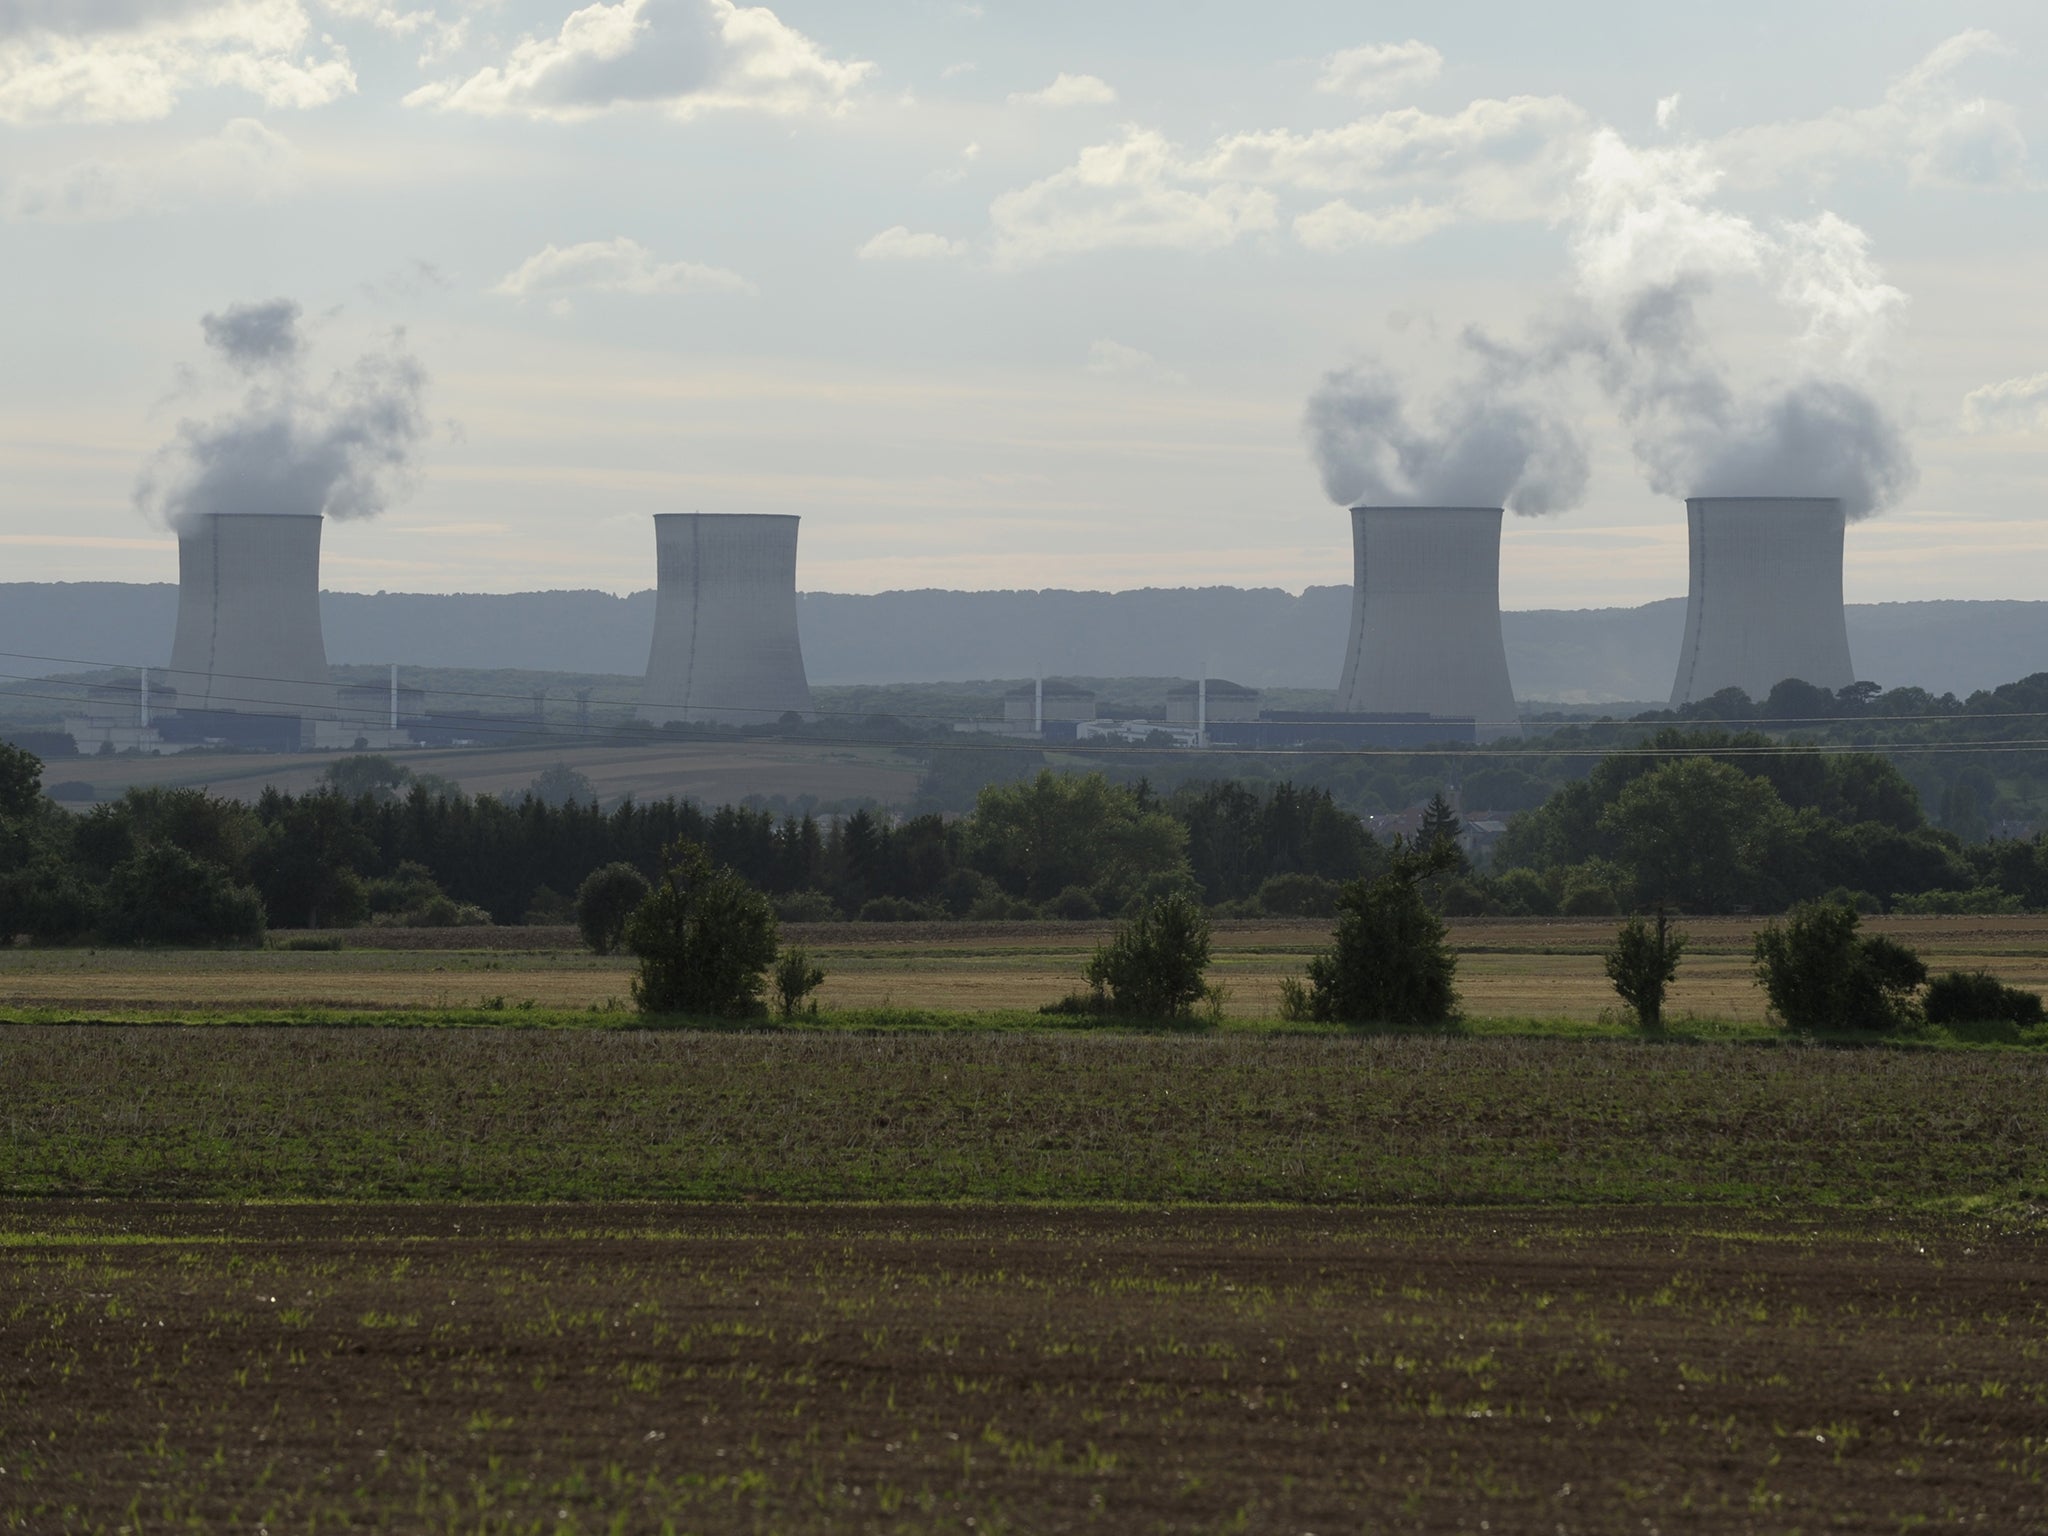 The pills were handed out after a number of mishaps at the Cattenom nuclear power station